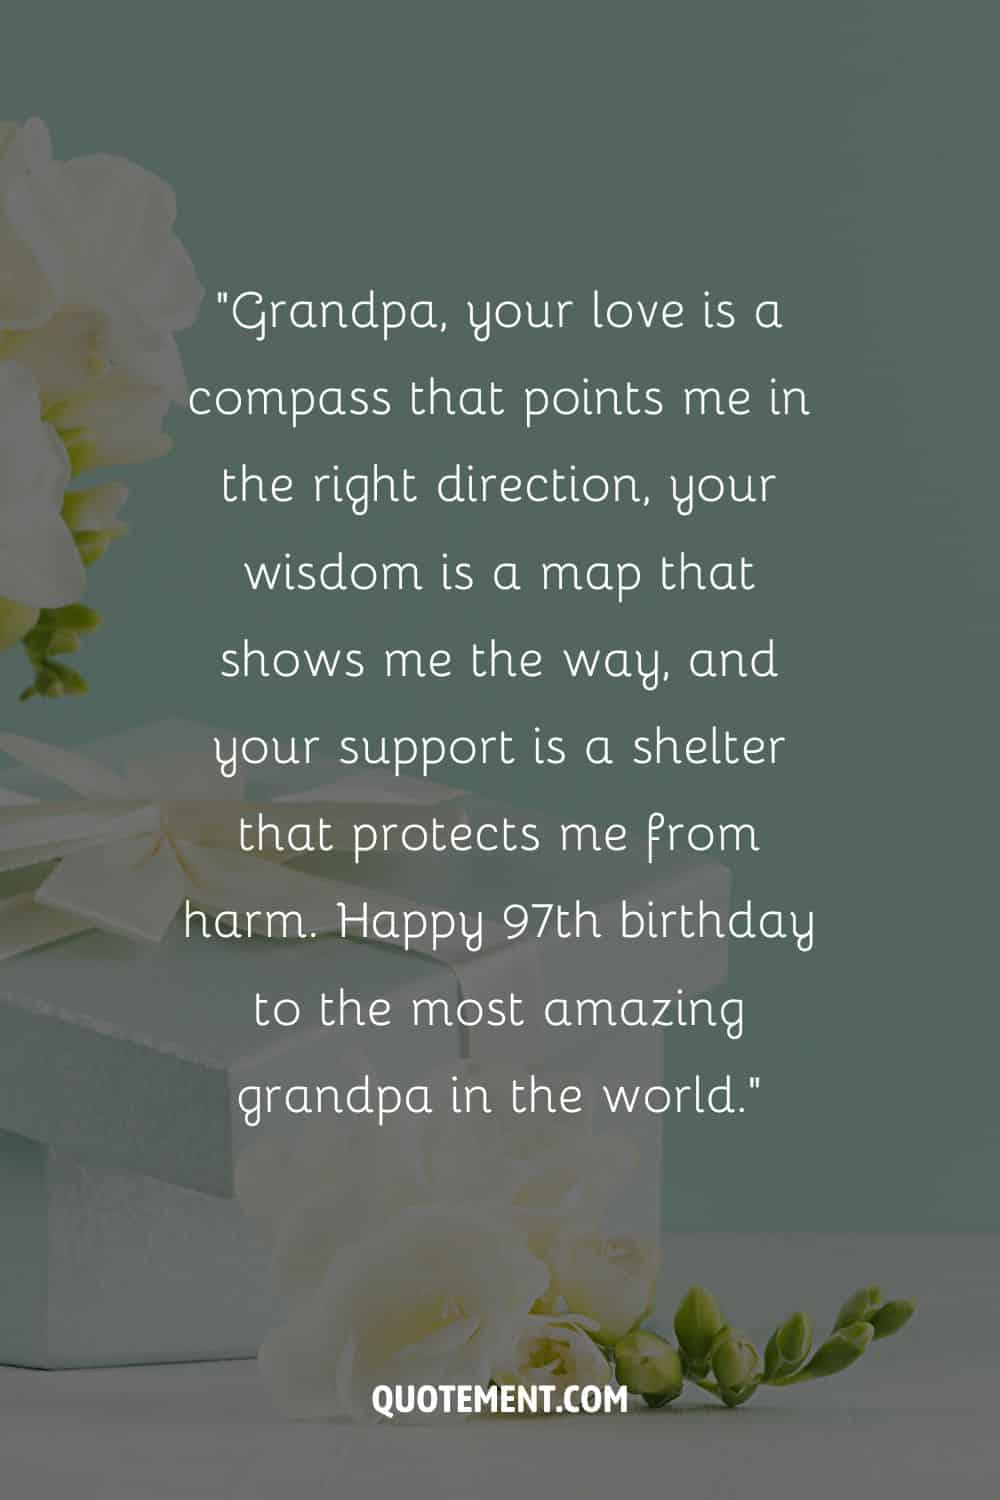 Message for your grandpa's 97th birthday and a present and flowers in the background, too
